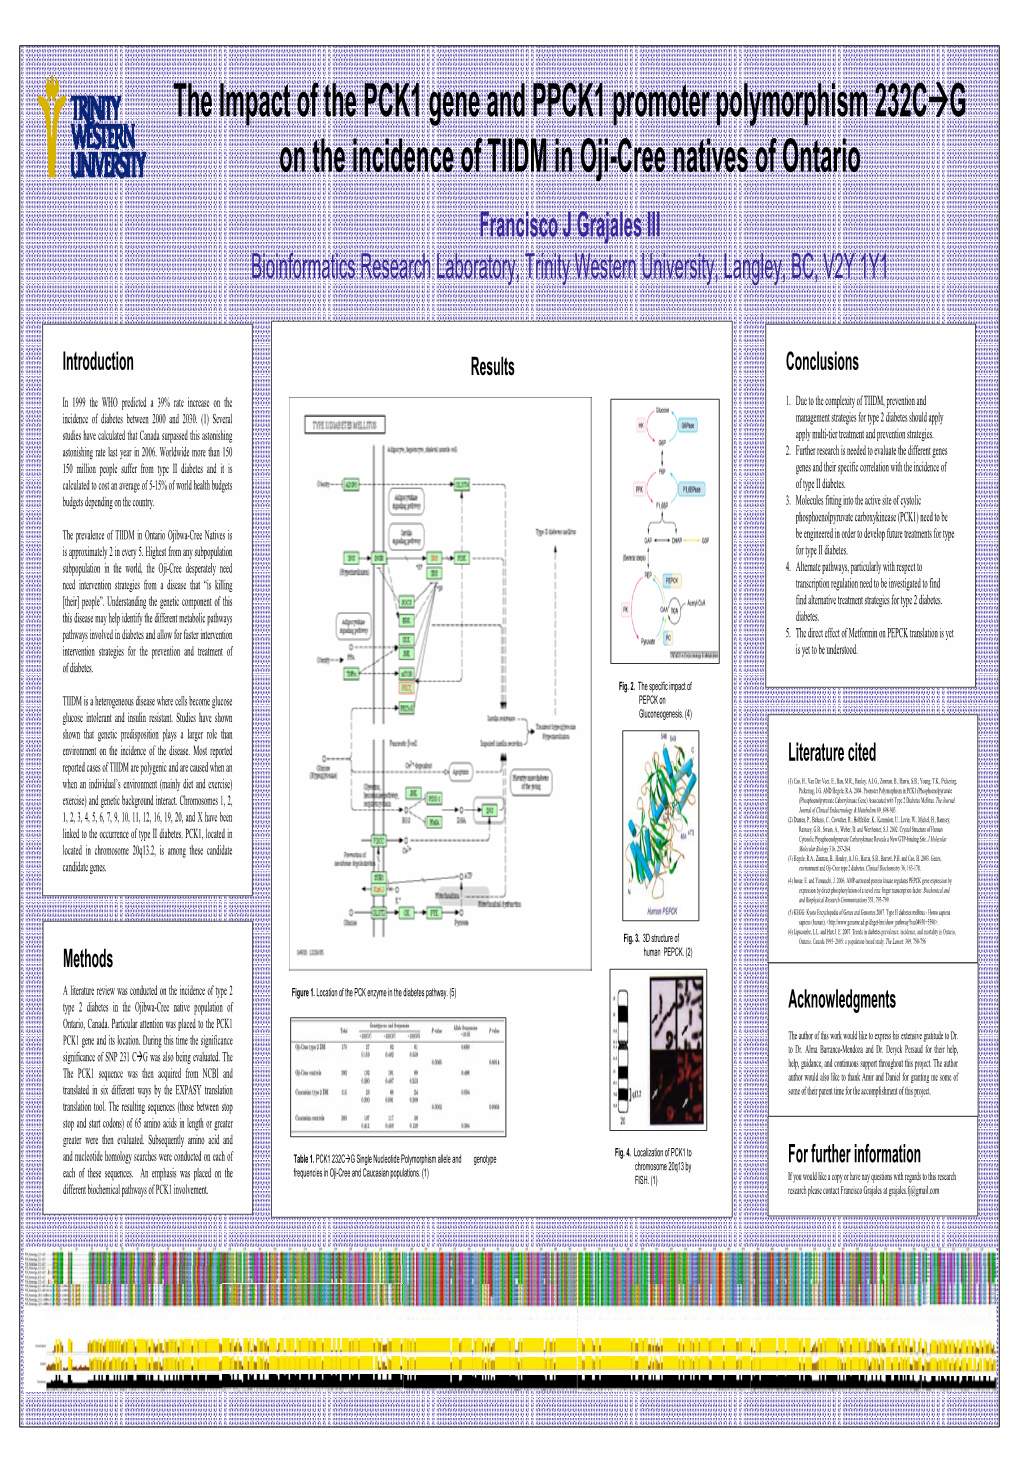 Powerpoint Template for Scientific Posters